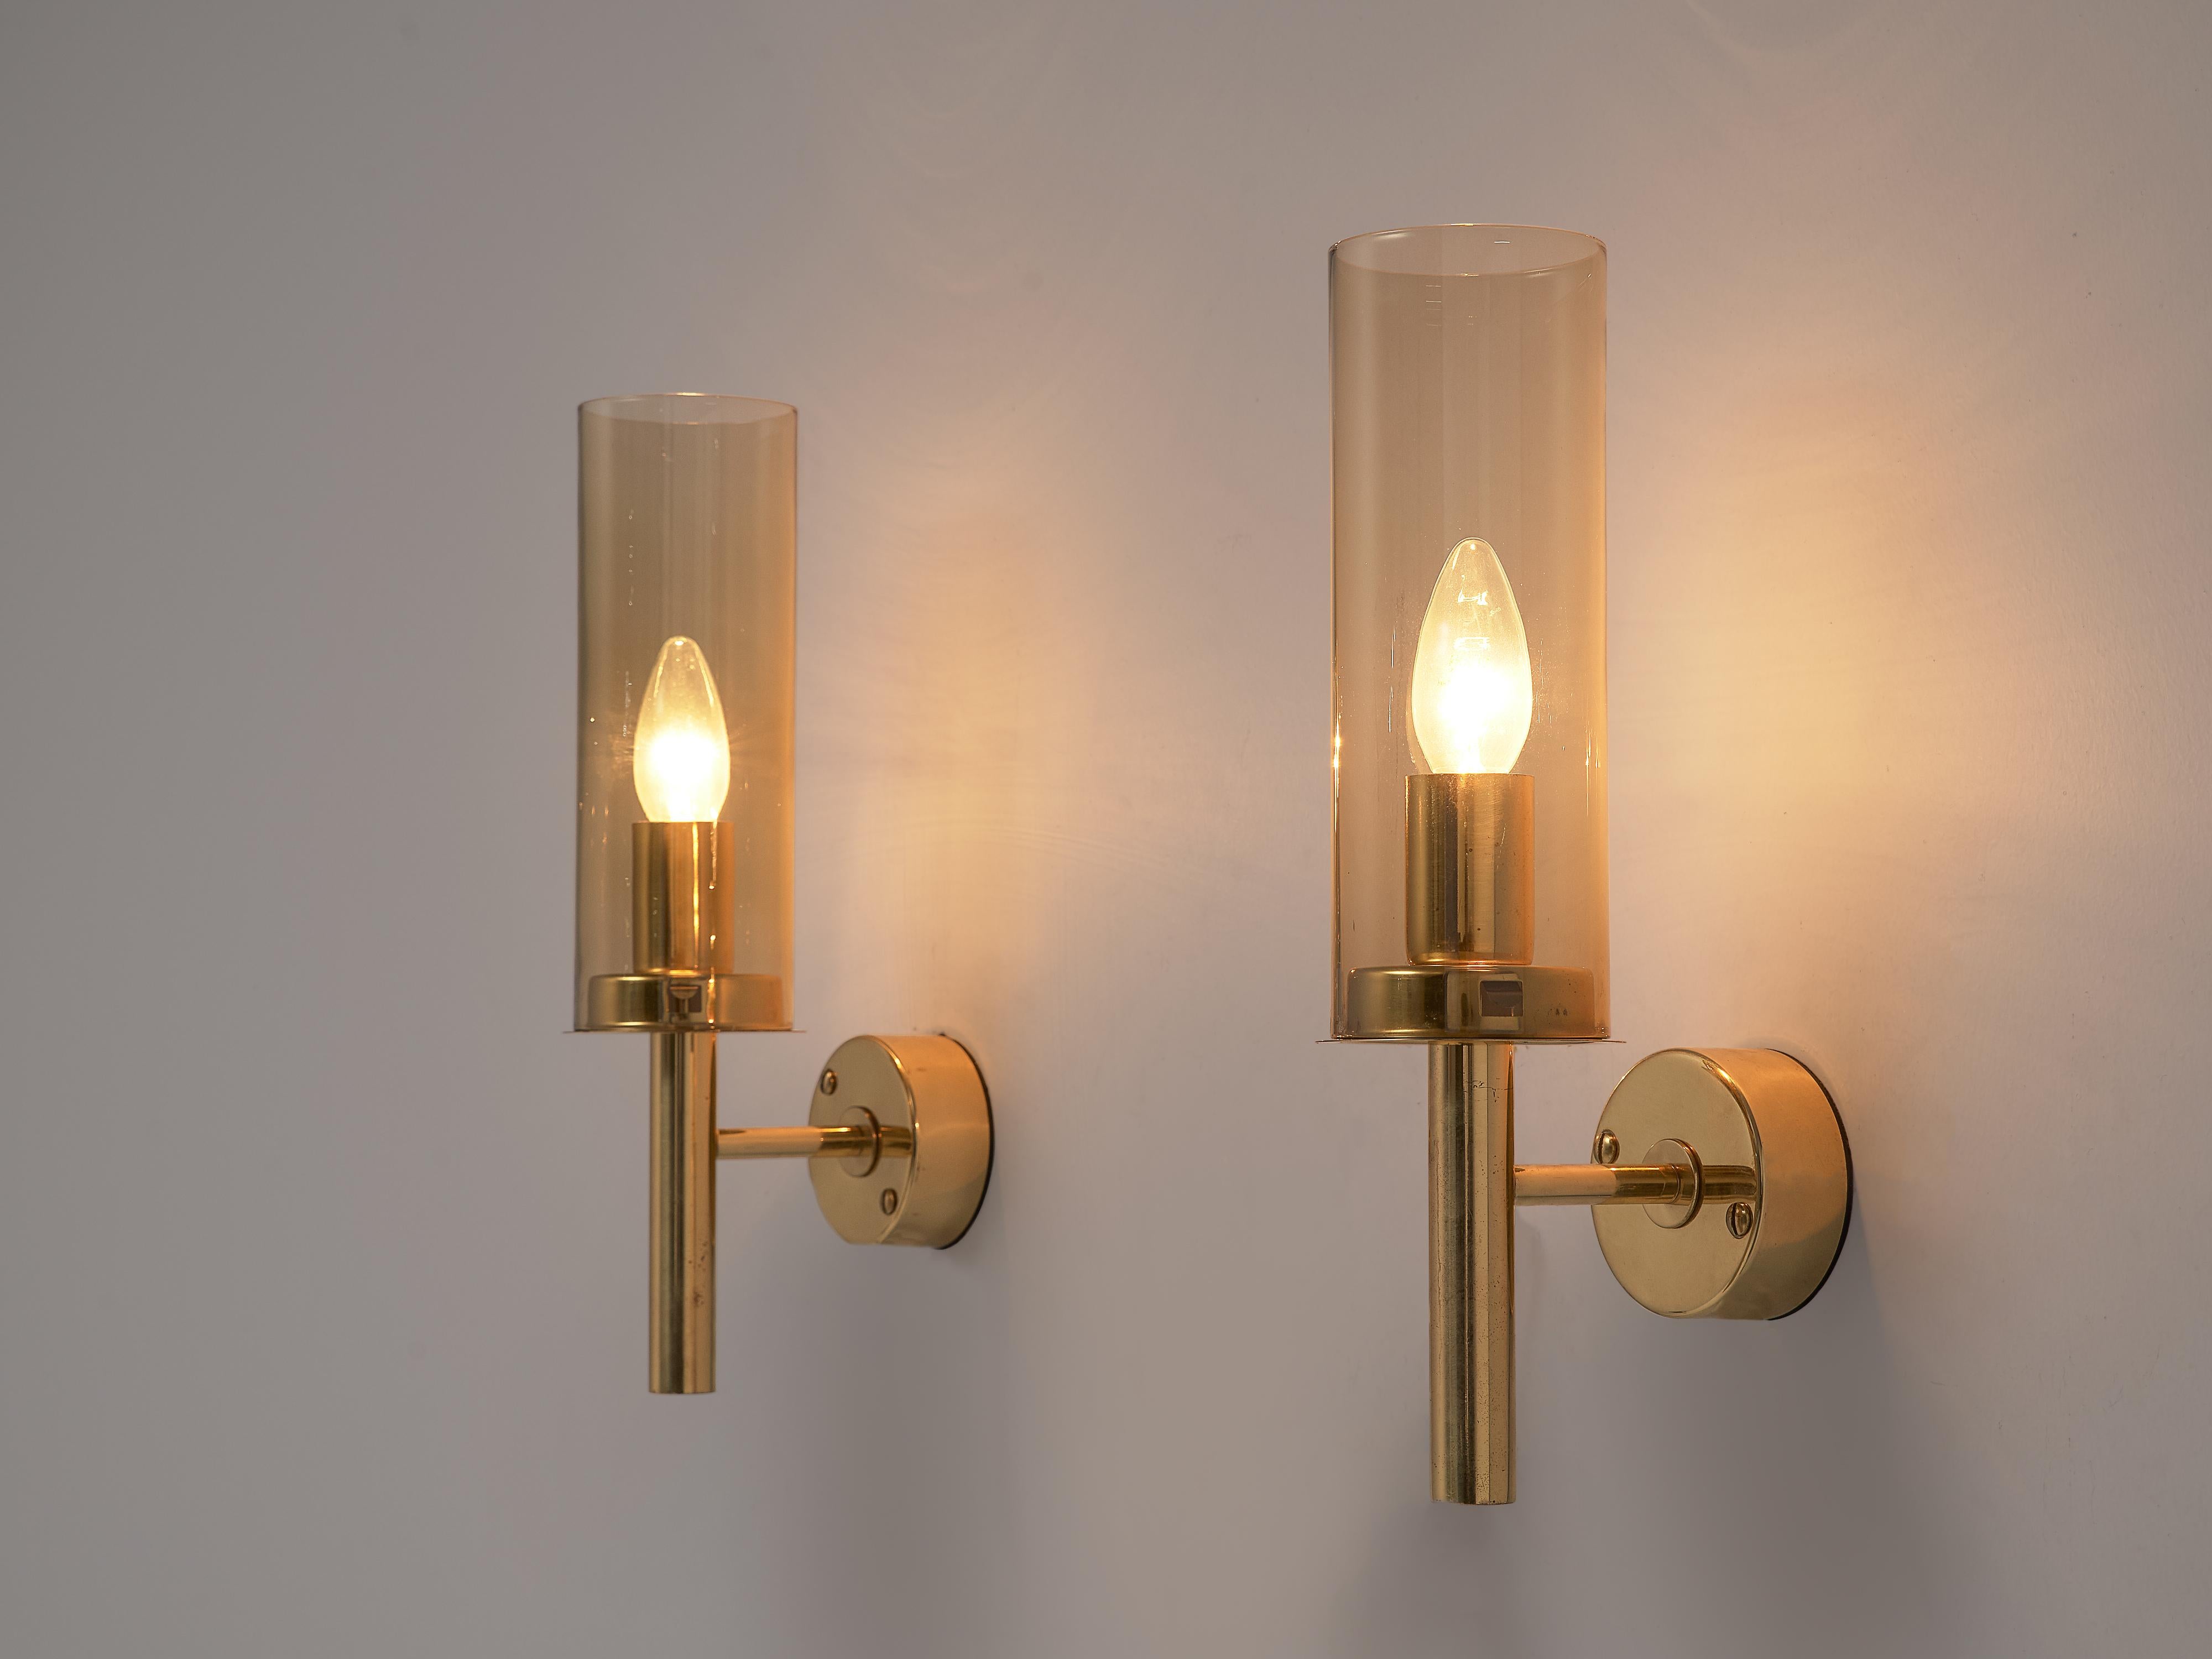 Hans-Agne Jakobsson, set of wall lights model V-169, brass, glass, Sweden, 1960s

This set of brass and glass wall lamps, model V-169 from the 'Sonata' collection, was designed by Hans-Agne Jakobsson in Sweden during the 1960s. The wall lamps